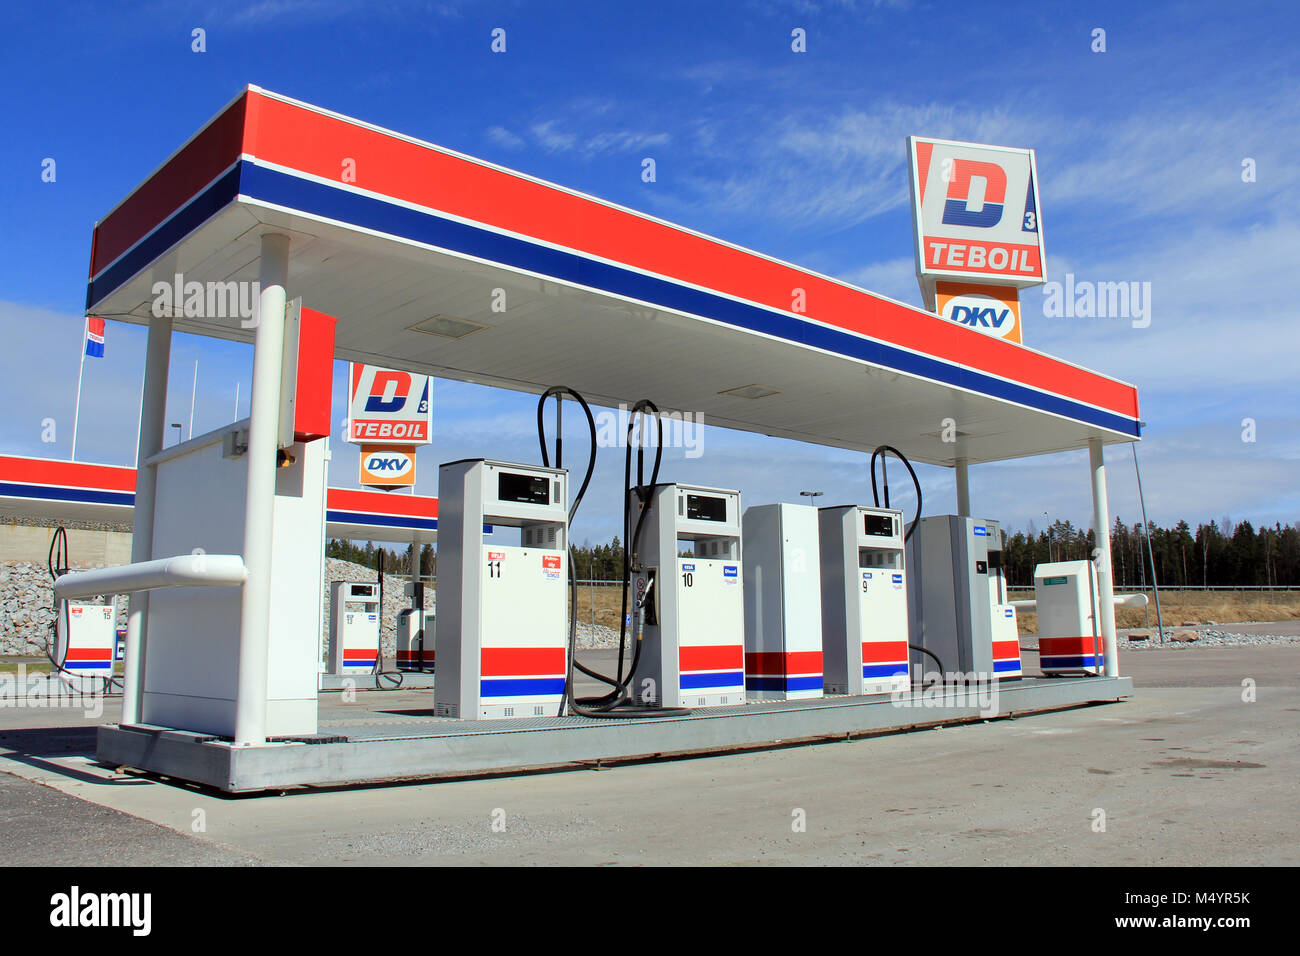 SALO, FINLAND - MAY 4, 2013: A diesel refueling station in Kitula, Salo, Finland on May 4, 2013. Stock Photo